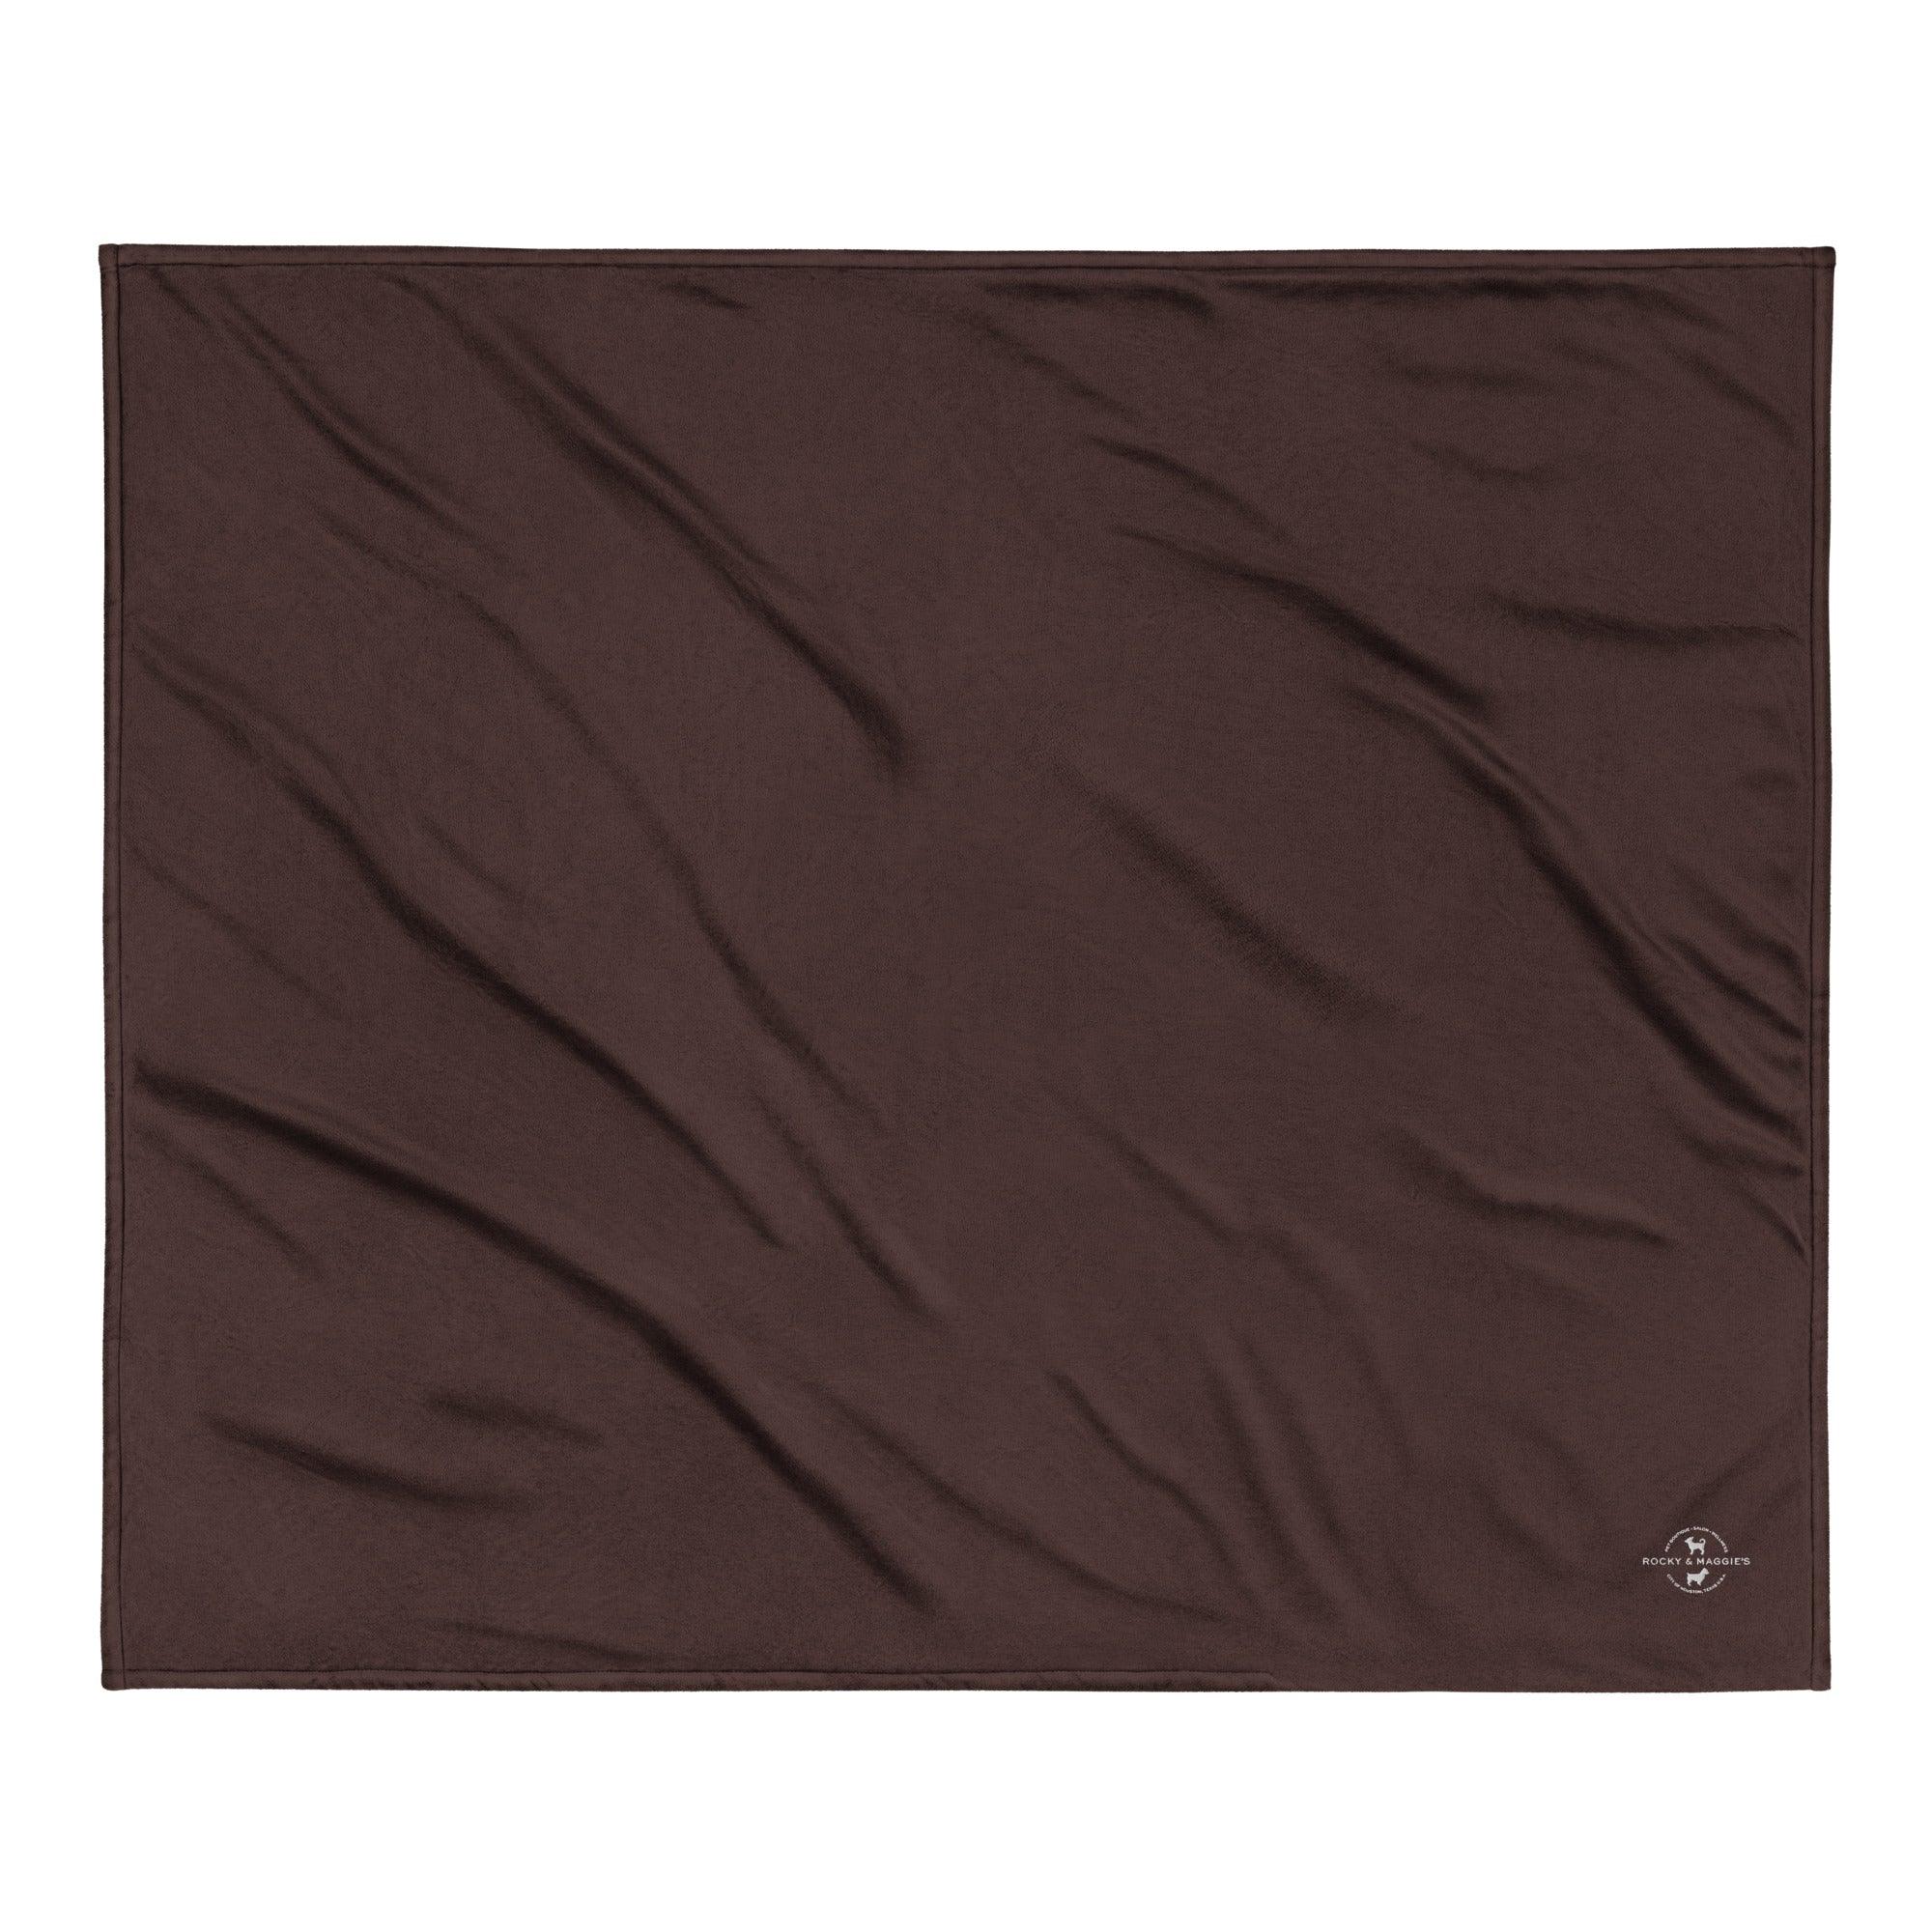 Rocky & Maggie's Premium sherpa blanket with logo - Rocky & Maggie's Pet Boutique and Salon